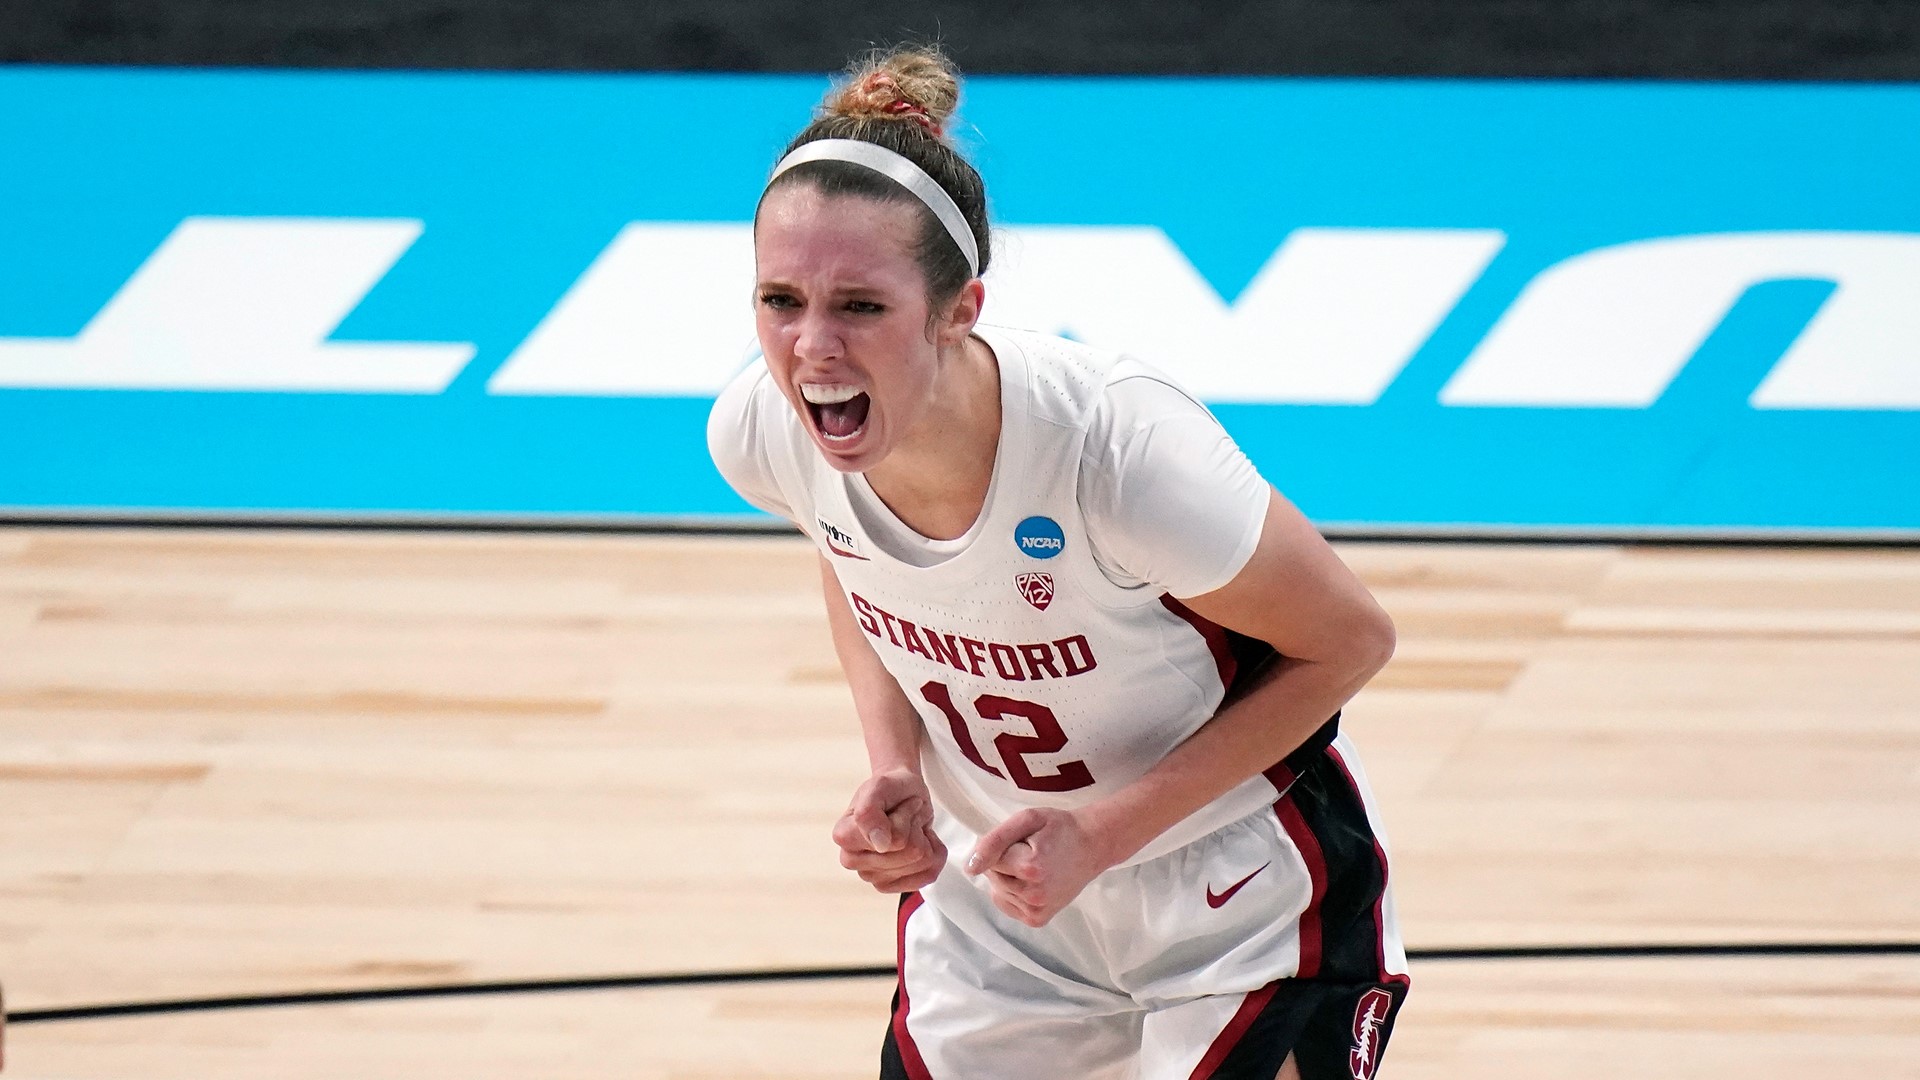 Stanford women's basketball guards Lexie and Lacie Hull are thrilled their team is moving on to the Final Four. Now they want to win the title.